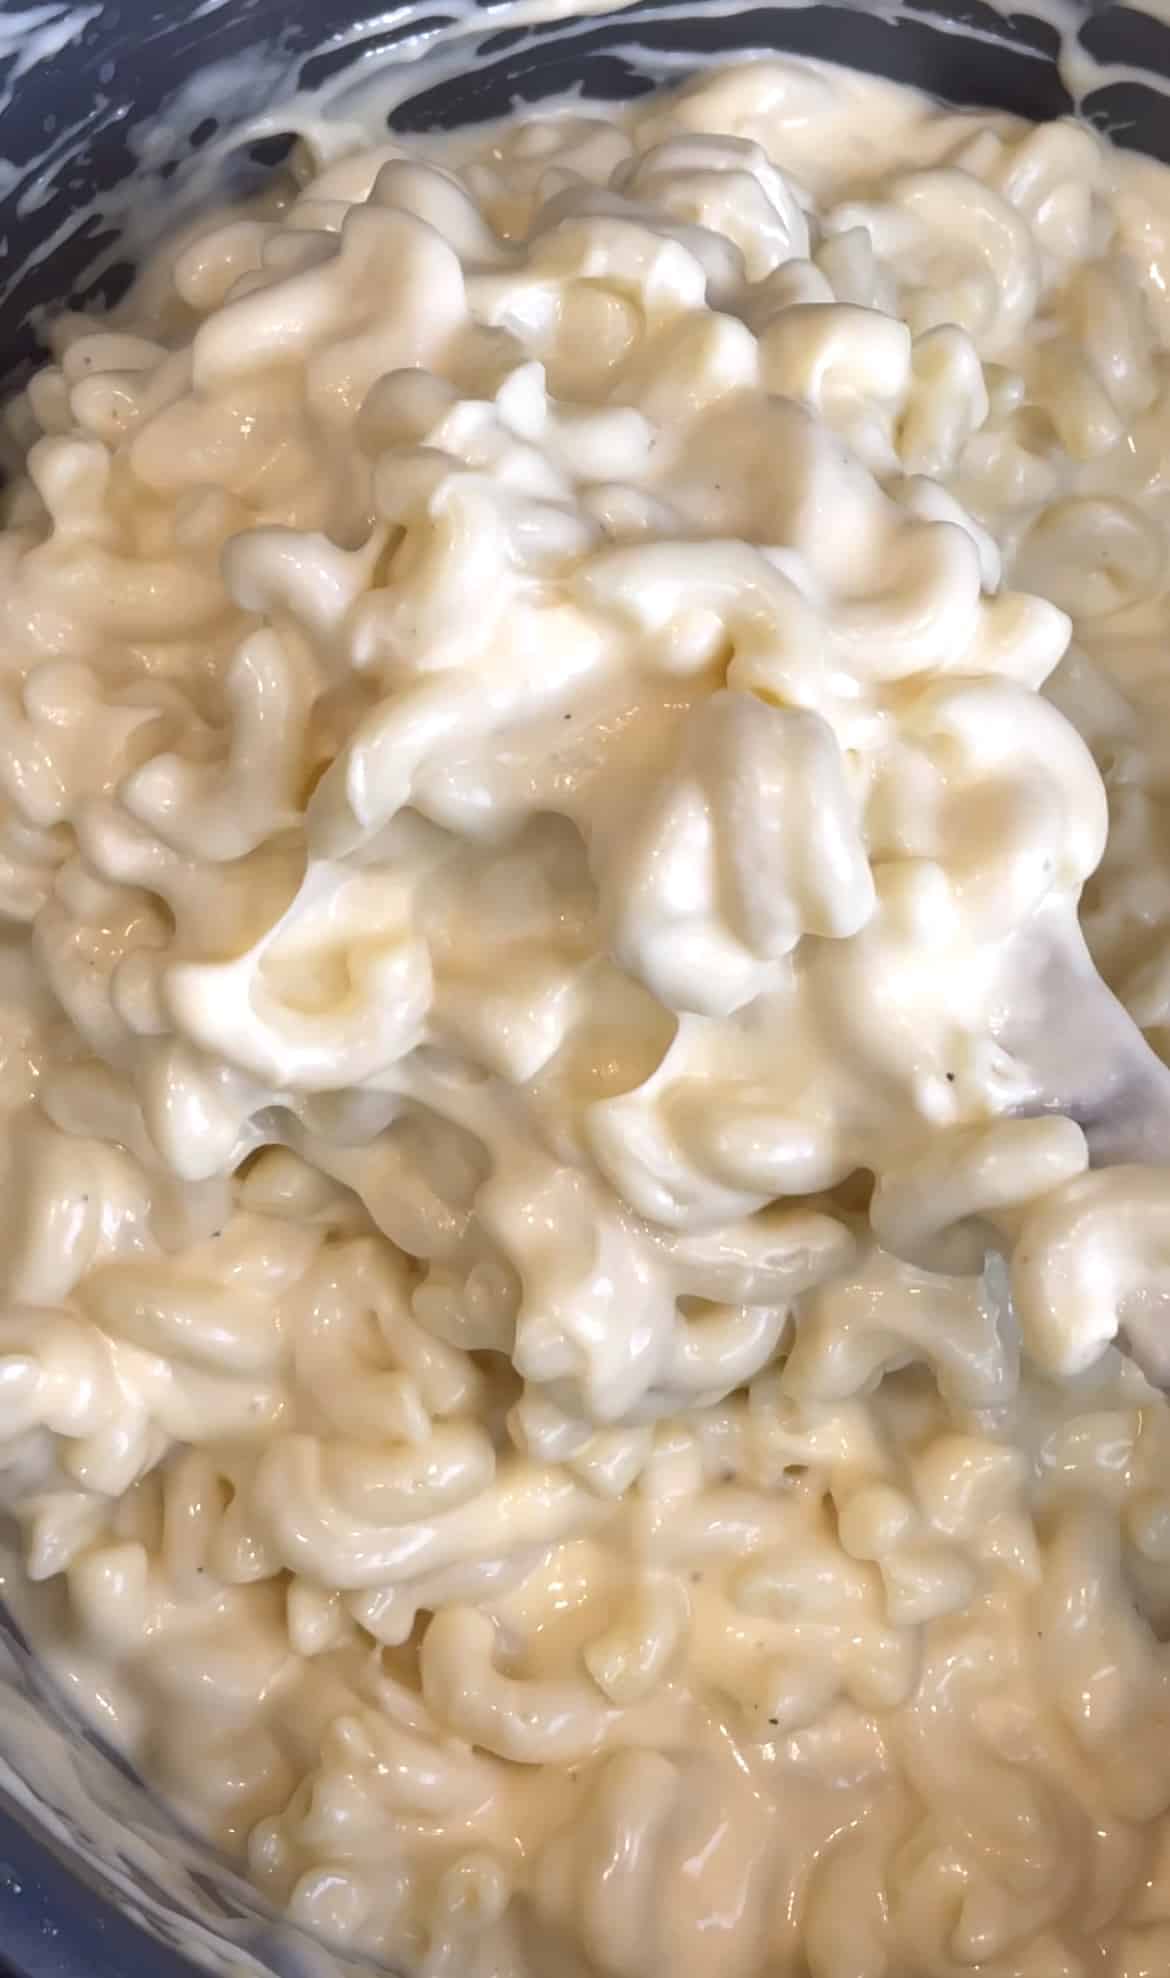 Cooking the macaroni with cream cheese.